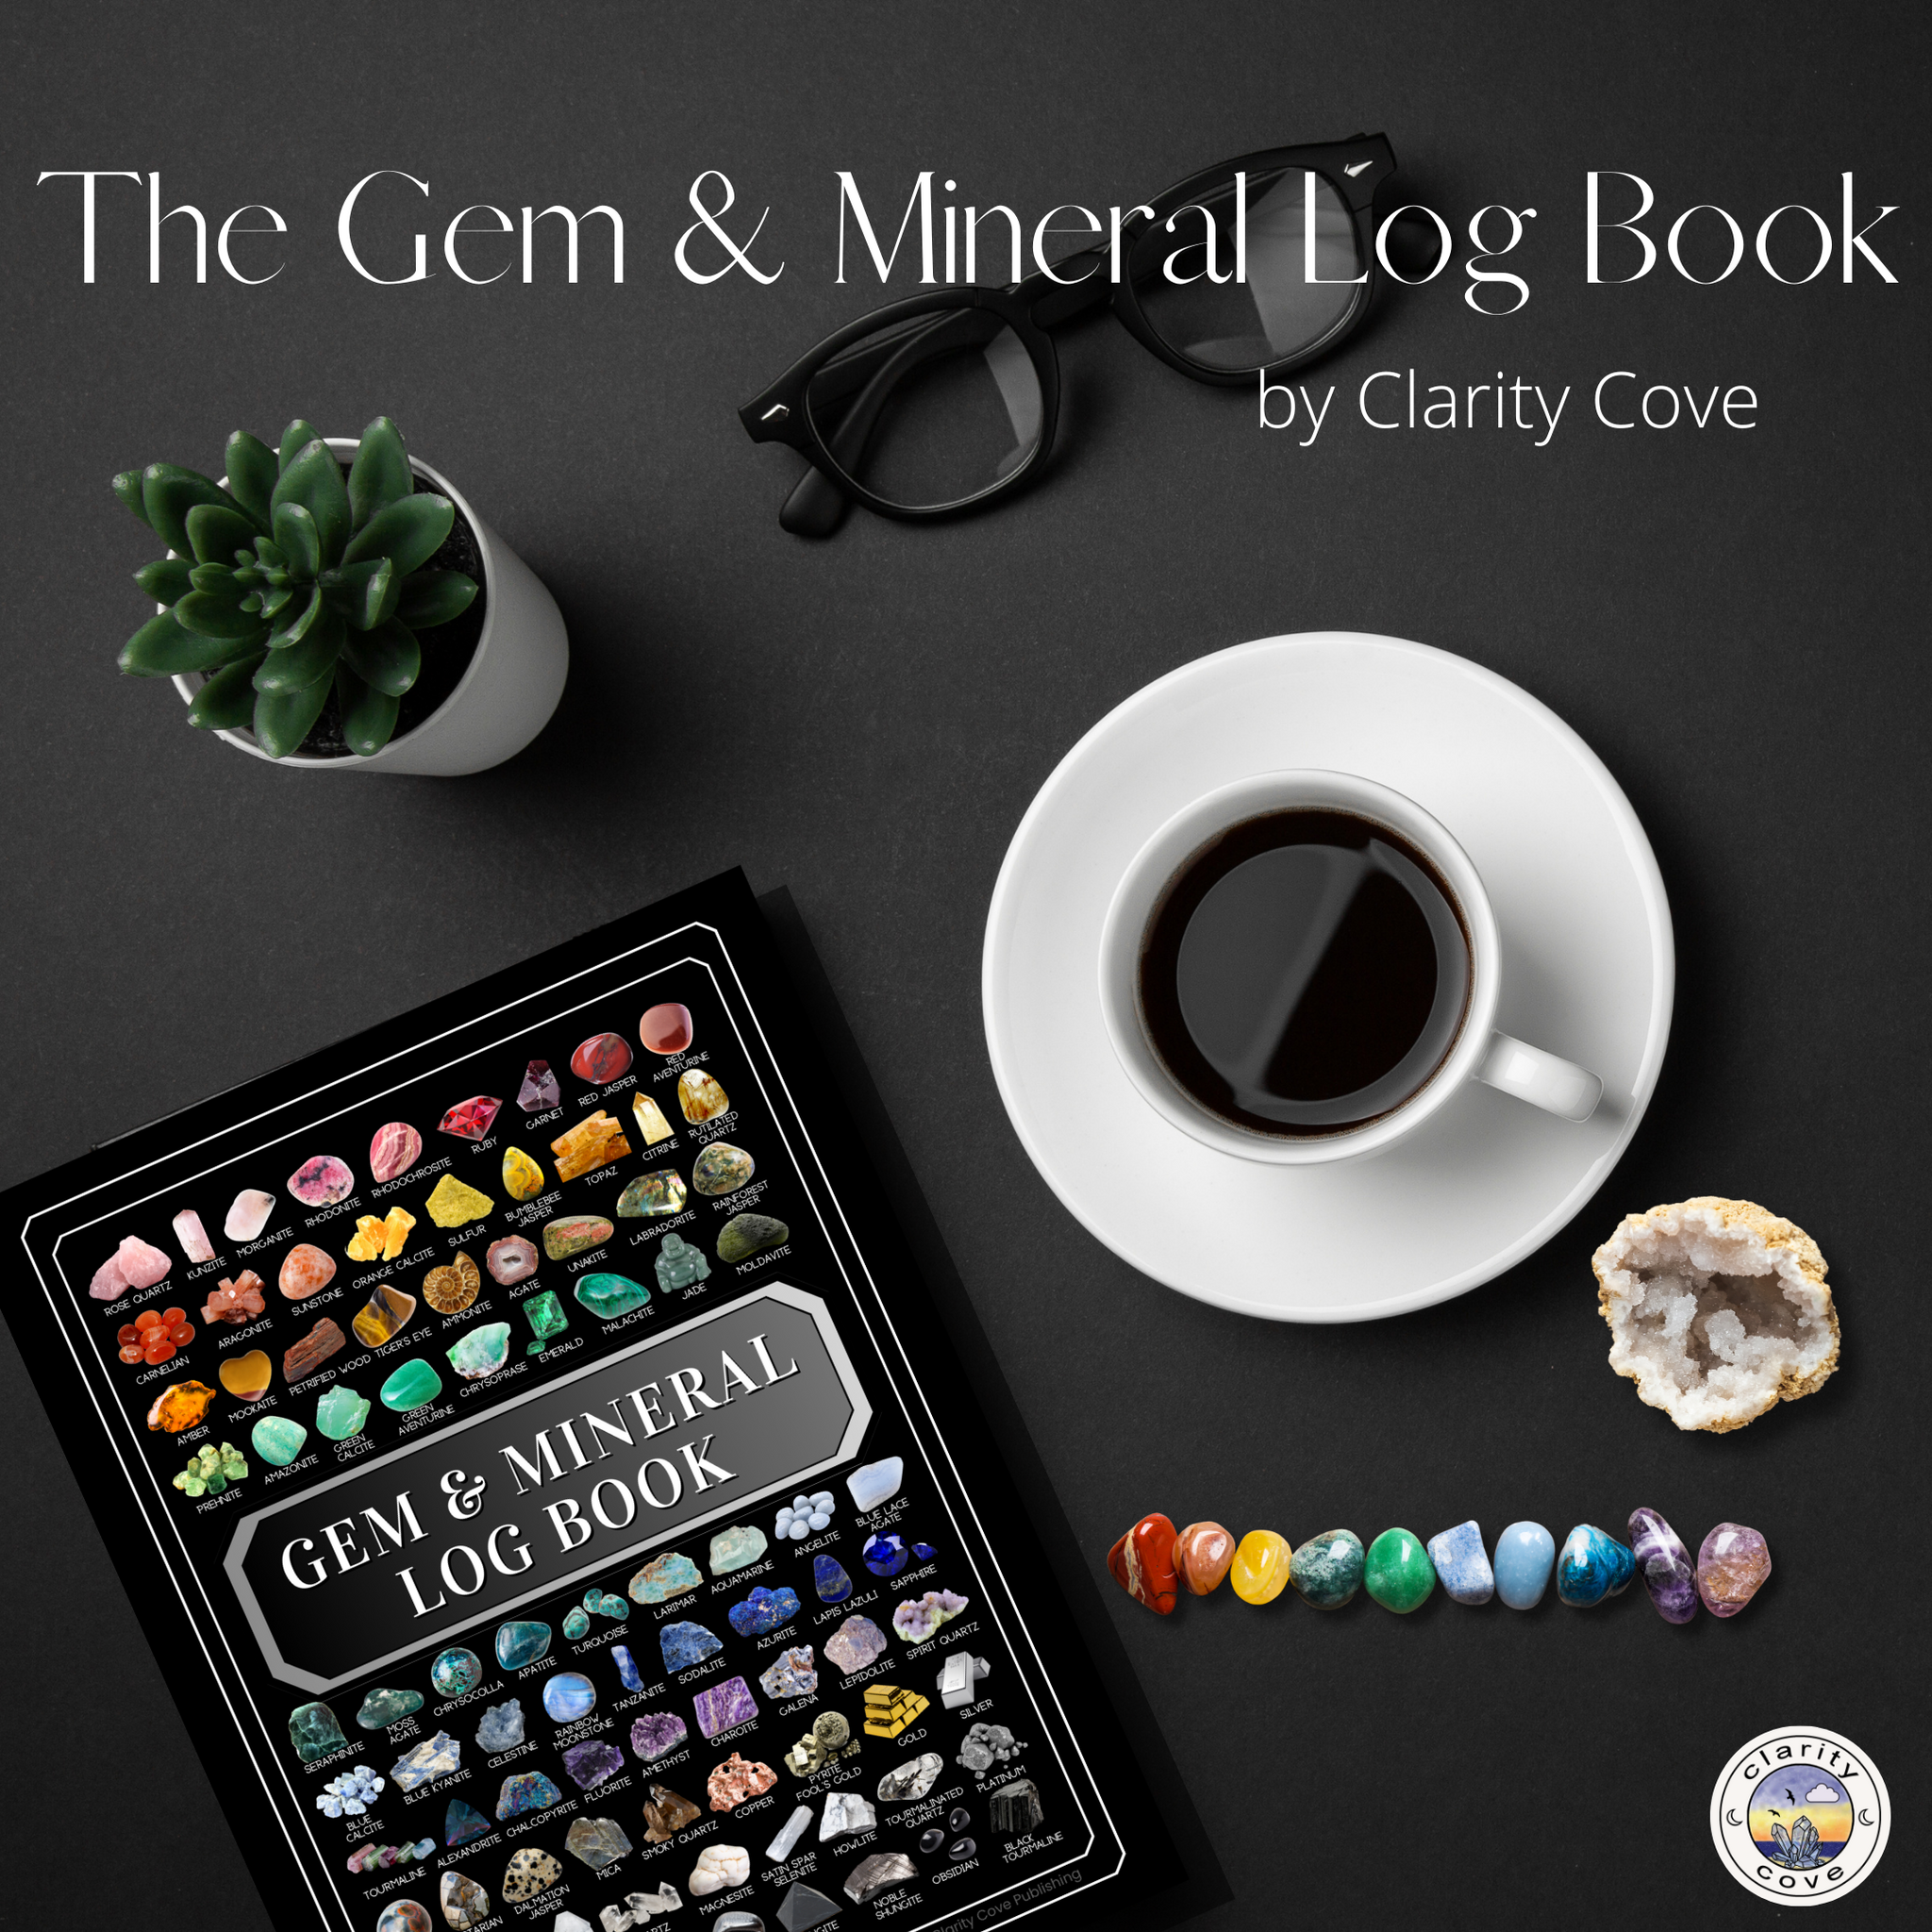 The GEM & MINERAL LOG BOOK from Clarity Cove is now available for crystal collectors!